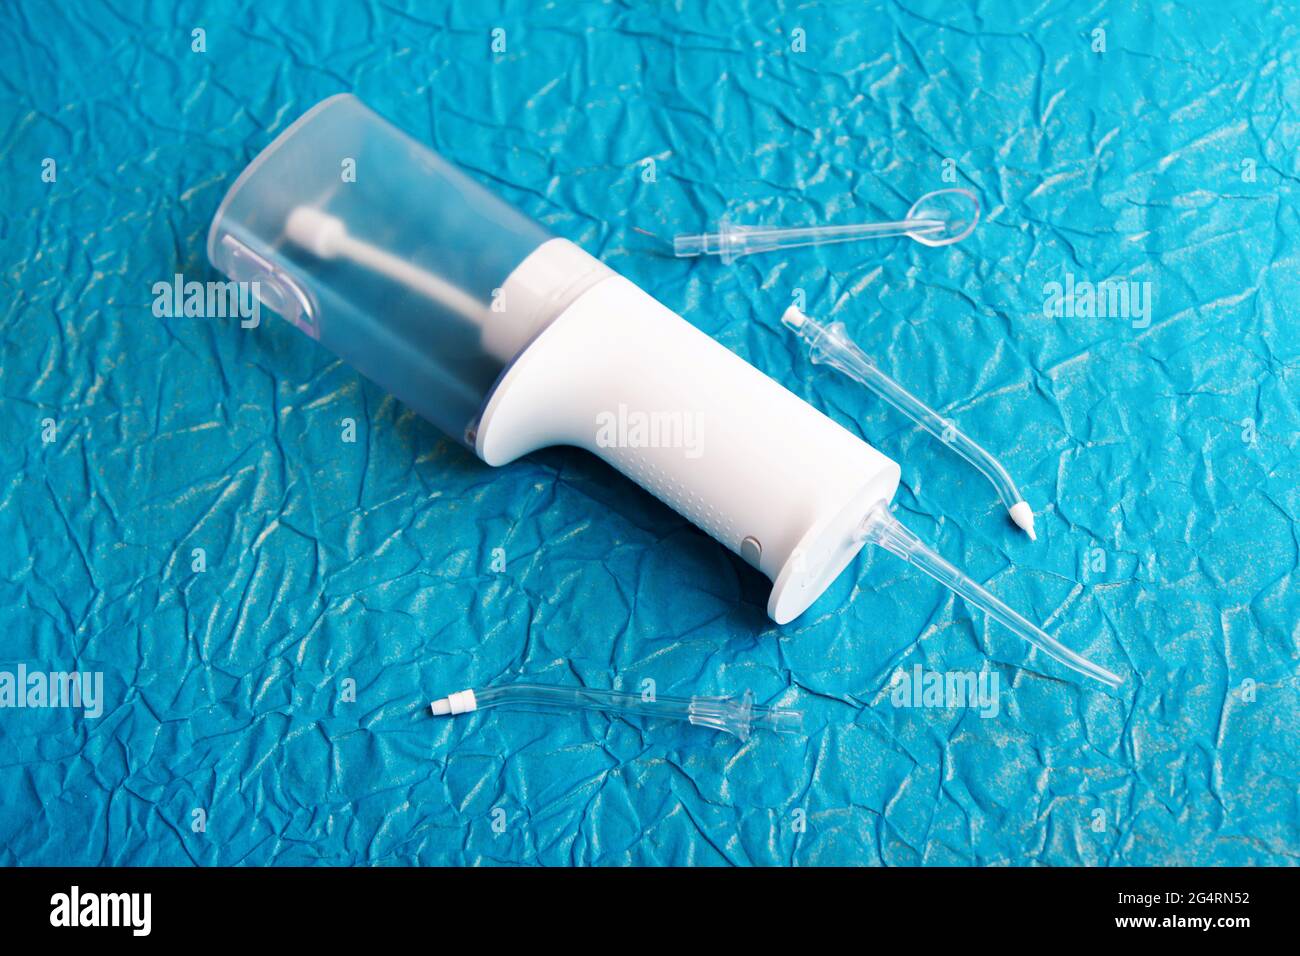 Electric dental irrigator with different nozzles - tools for teeth hygiene. Stock Photo